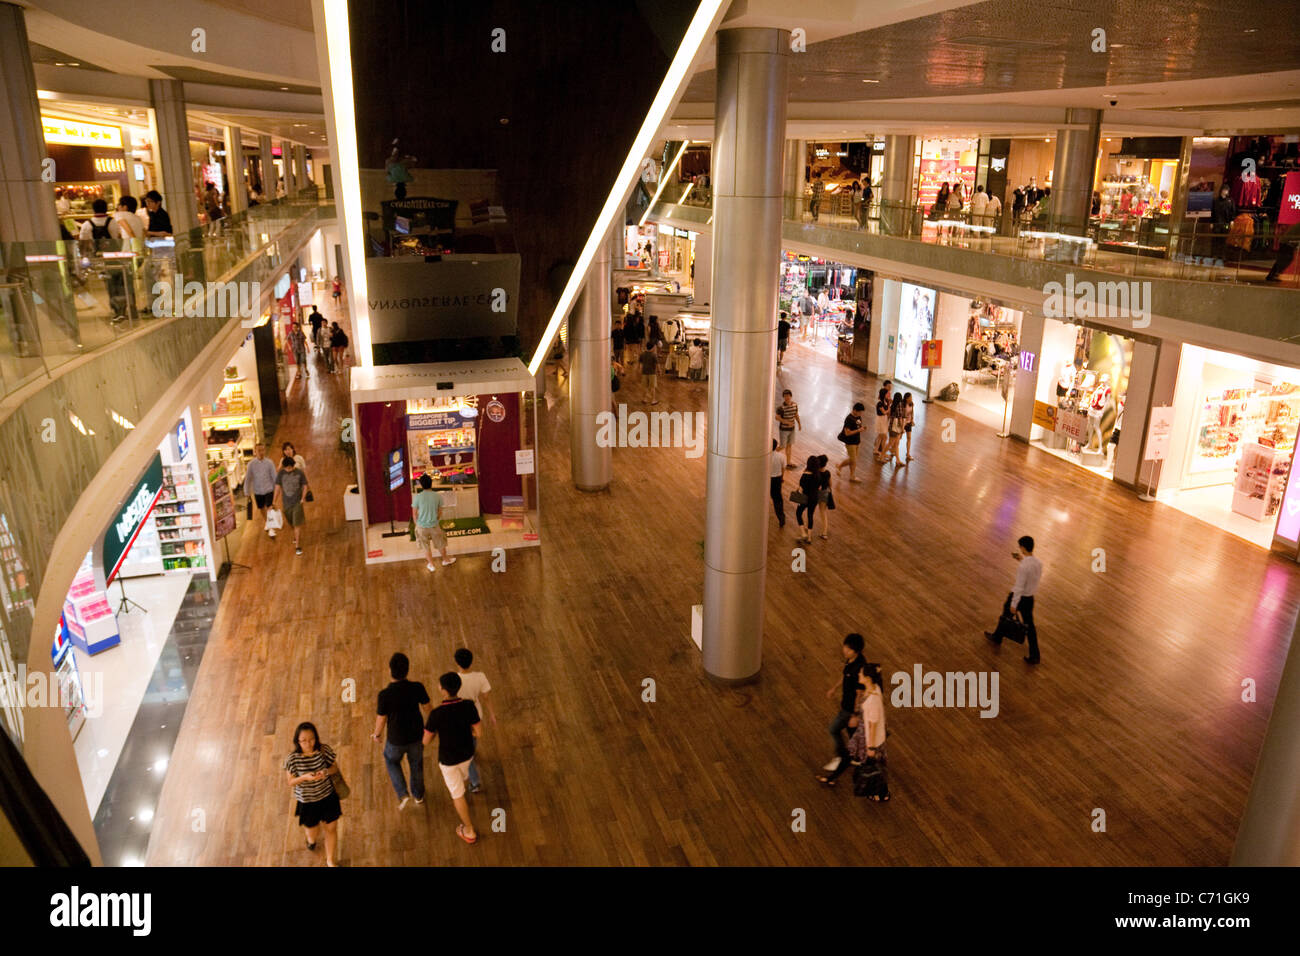 Die Ionen-Shopping Mall, Orchard Road, Singapur Asien Stockfoto